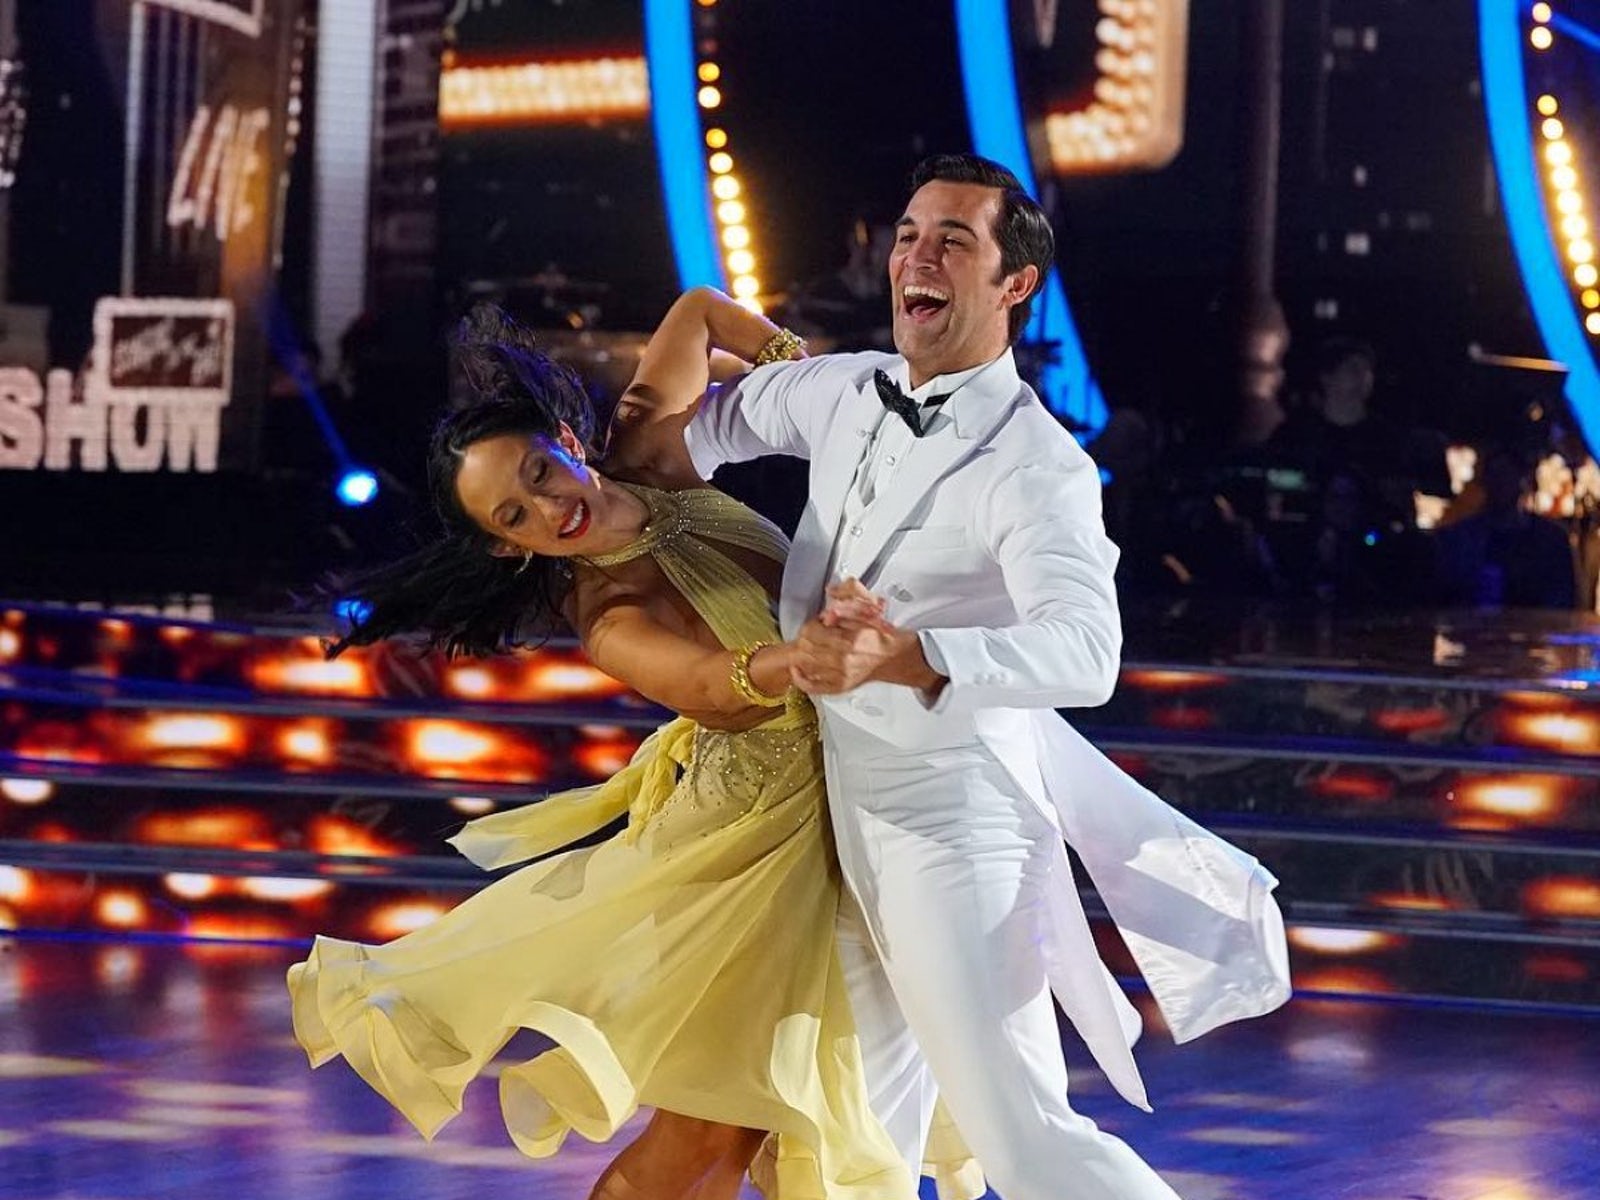 DISASTER: Dancing With The Stars Credibility Sinks - Best 